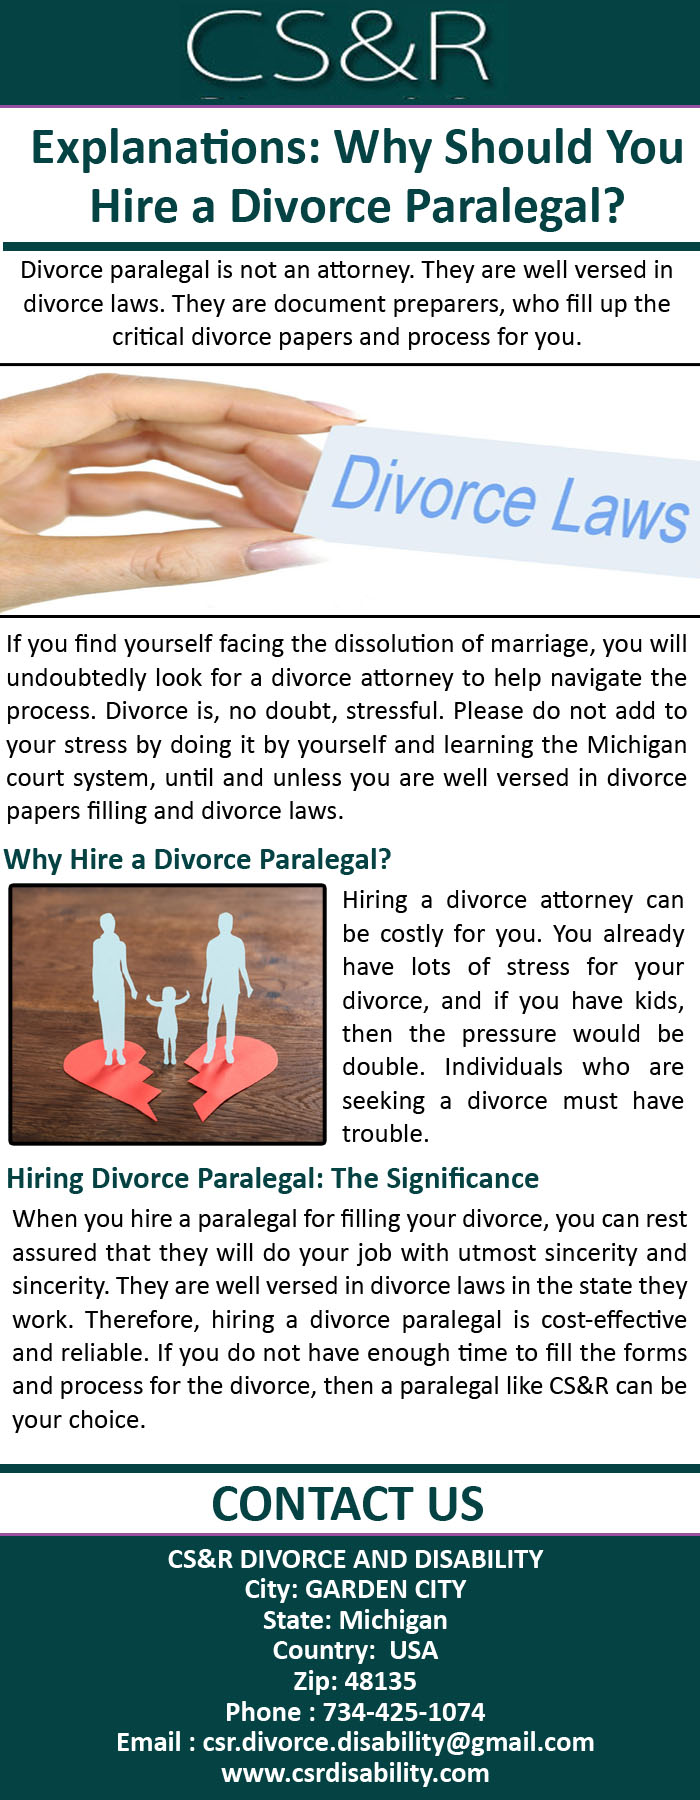 Explanations - Why Should You Hire a Divorce Paralegal.jpg  by csrdisability